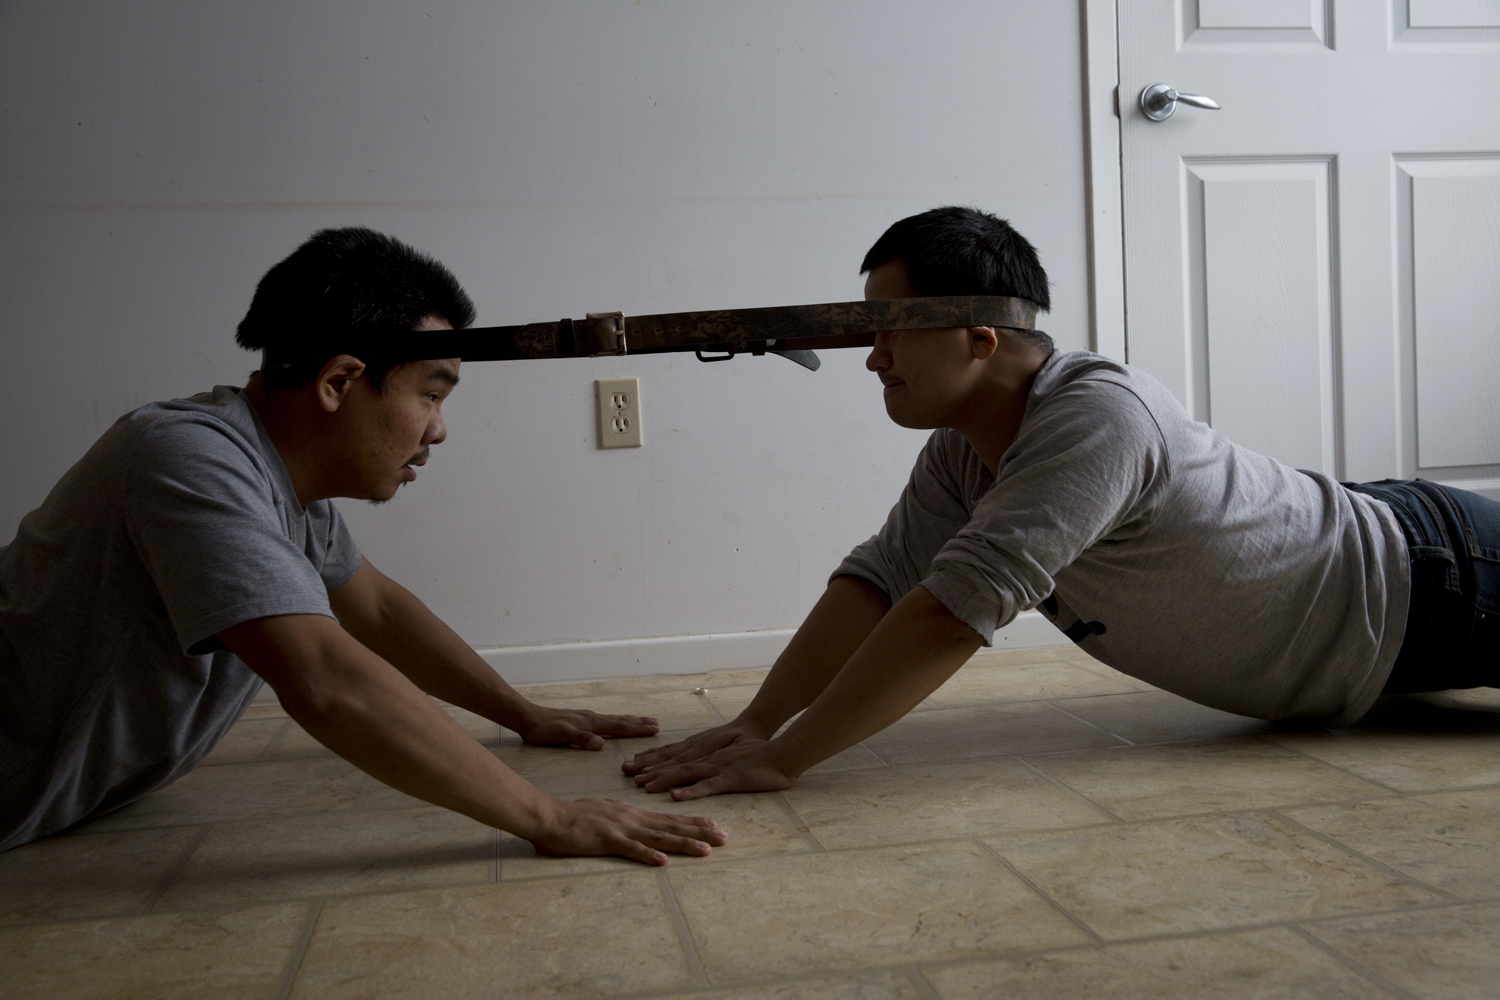 ARVIAT, CANADA - OCTOBER 16  William Tiktaq (left), 28, and Brian Tagalik (right), 28, compete with each other in an Inuit head pull competition inside their home in Arviat, Canada on Oct. 16, 2013. Inuit games are played as a way to pass the time while stuck indoors during the cold arctic winters and to test and develop the skills required for hunting and arctic survival, including strength, agility, and tolerance to pain. They require very little equipment and can be played in tight spaces.  (Ed Ou/Reportage by Getty Images)